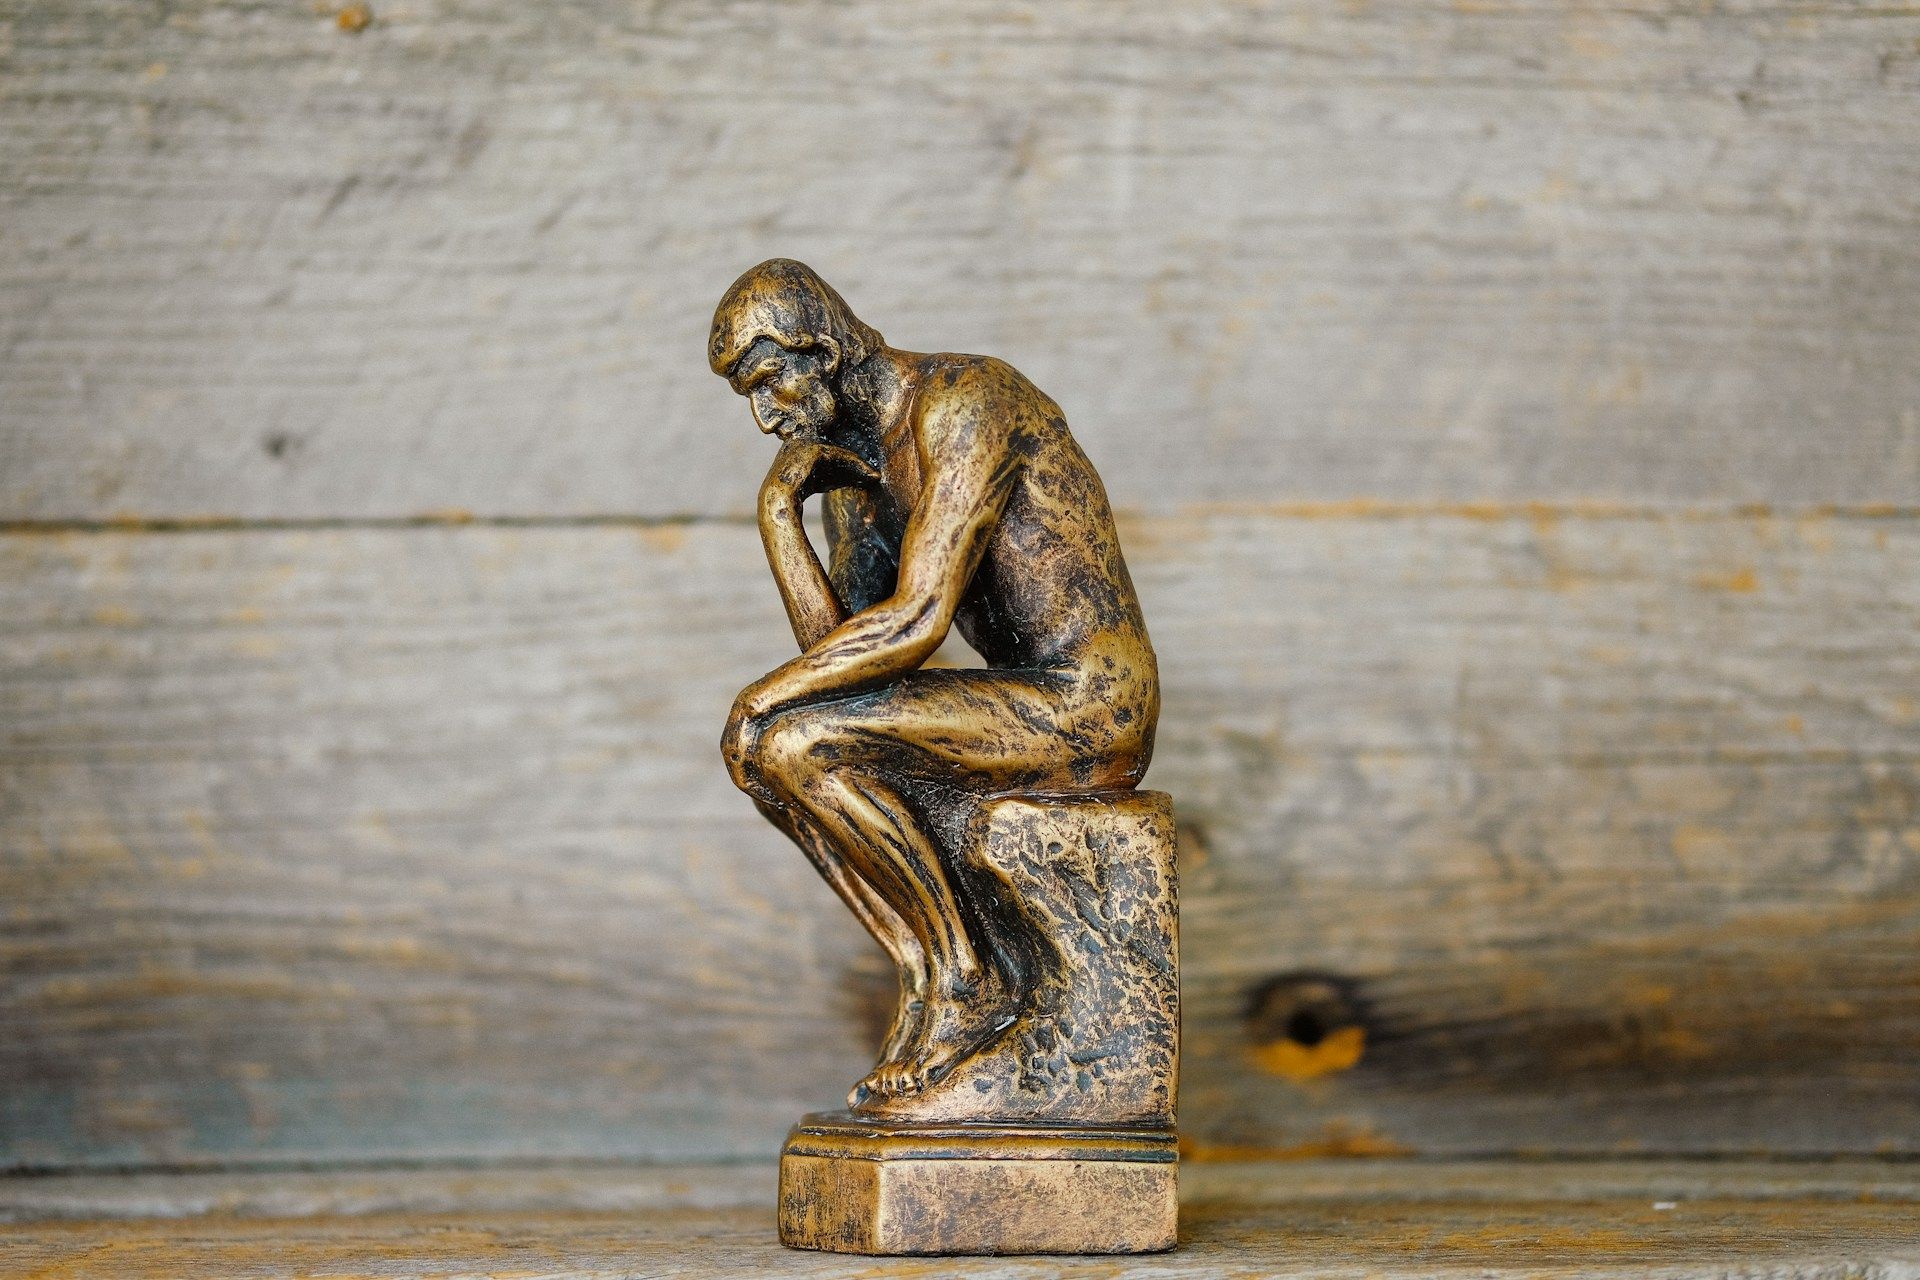 A small bronze statue of a man in a contemplative pose, seated on a square pedestal with his chin resting on his hand, resembling Auguste Rodin’s “The Thinker,” against a rustic wooden background